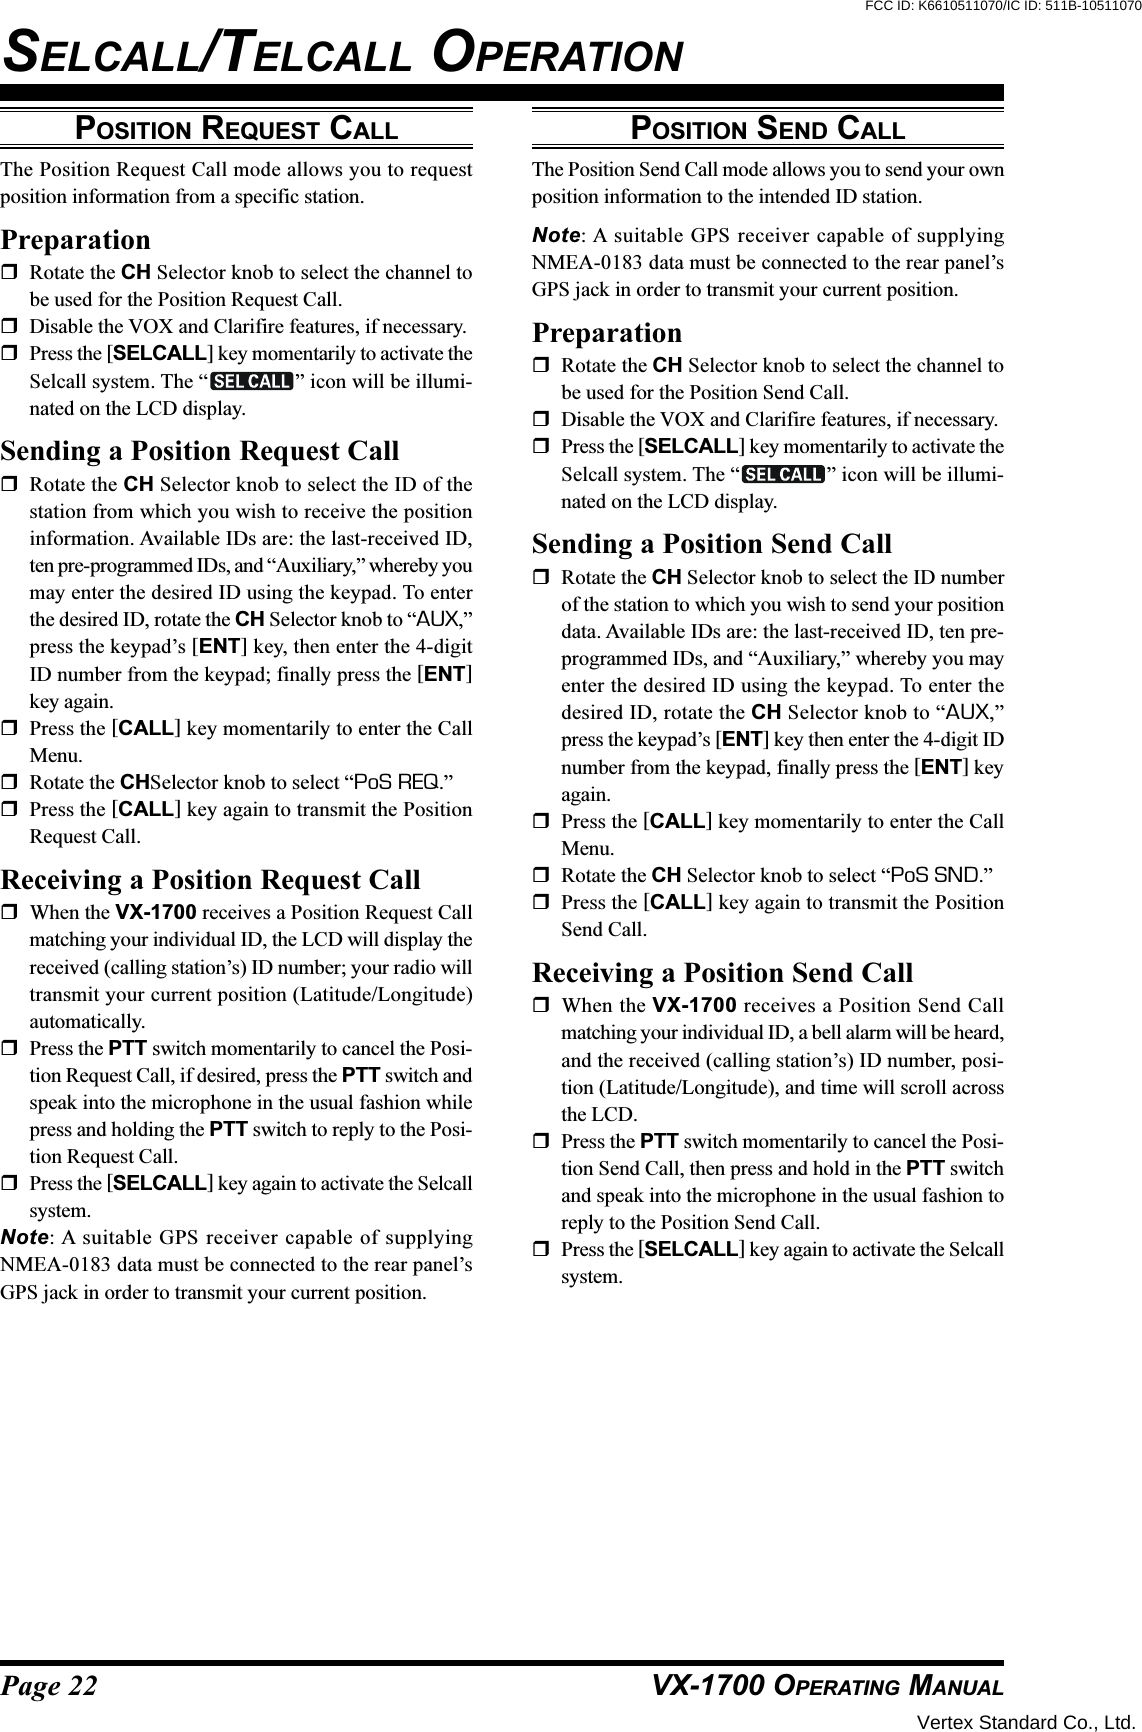 Page 22 VX-1700 OPERATING MANUALPOSITION REQUEST CALLThe Position Request Call mode allows you to requestposition information from a specific station.PreparationRotate the CH Selector knob to select the channel tobe used for the Position Request Call.Disable the VOX and Clarifire features, if necessary.Press the [SELCALL] key momentarily to activate theSelcall system. The “ ” icon will be illumi-nated on the LCD display.Sending a Position Request CallRotate the CH Selector knob to select the ID of thestation from which you wish to receive the positioninformation. Available IDs are: the last-received ID,ten pre-programmed IDs, and “Auxiliary,” whereby youmay enter the desired ID using the keypad. To enterthe desired ID, rotate the CH Selector knob to “AUX,”press the keypad’s [ENT] key, then enter the 4-digitID number from the keypad; finally press the [ENT]key again.Press the [CALL] key momentarily to enter the CallMenu.Rotate the CHSelector knob to select “PoS REQ.”Press the [CALL] key again to transmit the PositionRequest Call.Receiving a Position Request CallWhen the VX-1700 receives a Position Request Callmatching your individual ID, the LCD will display thereceived (calling station’s) ID number; your radio willtransmit your current position (Latitude/Longitude)automatically.Press the PTT switch momentarily to cancel the Posi-tion Request Call, if desired, press the PTT switch andspeak into the microphone in the usual fashion whilepress and holding the PTT switch to reply to the Posi-tion Request Call.Press the [SELCALL] key again to activate the Selcallsystem.Note: A suitable GPS receiver capable of supplyingNMEA-0183 data must be connected to the rear panel’sGPS jack in order to transmit your current position.SELCALL/TELCALL OPERATIONPOSITION SEND CALLThe Position Send Call mode allows you to send your ownposition information to the intended ID station.Note: A suitable GPS receiver capable of supplyingNMEA-0183 data must be connected to the rear panel’sGPS jack in order to transmit your current position.PreparationRotate the CH Selector knob to select the channel tobe used for the Position Send Call.Disable the VOX and Clarifire features, if necessary.Press the [SELCALL] key momentarily to activate theSelcall system. The “ ” icon will be illumi-nated on the LCD display.Sending a Position Send CallRotate the CH Selector knob to select the ID numberof the station to which you wish to send your positiondata. Available IDs are: the last-received ID, ten pre-programmed IDs, and “Auxiliary,” whereby you mayenter the desired ID using the keypad. To enter thedesired ID, rotate the CH Selector knob to “AUX,”press the keypad’s [ENT] key then enter the 4-digit IDnumber from the keypad, finally press the [ENT] keyagain.Press the [CALL] key momentarily to enter the CallMenu.Rotate the CH Selector knob to select “PoS SND.”Press the [CALL] key again to transmit the PositionSend Call.Receiving a Position Send CallWhen the VX-1700 receives a Position Send Callmatching your individual ID, a bell alarm will be heard,and the received (calling station’s) ID number, posi-tion (Latitude/Longitude), and time will scroll acrossthe LCD.Press the PTT switch momentarily to cancel the Posi-tion Send Call, then press and hold in the PTT switchand speak into the microphone in the usual fashion toreply to the Position Send Call.Press the [SELCALL] key again to activate the Selcallsystem.Vertex Standard Co., Ltd.FCC ID: K6610511070/IC ID: 511B-10511070